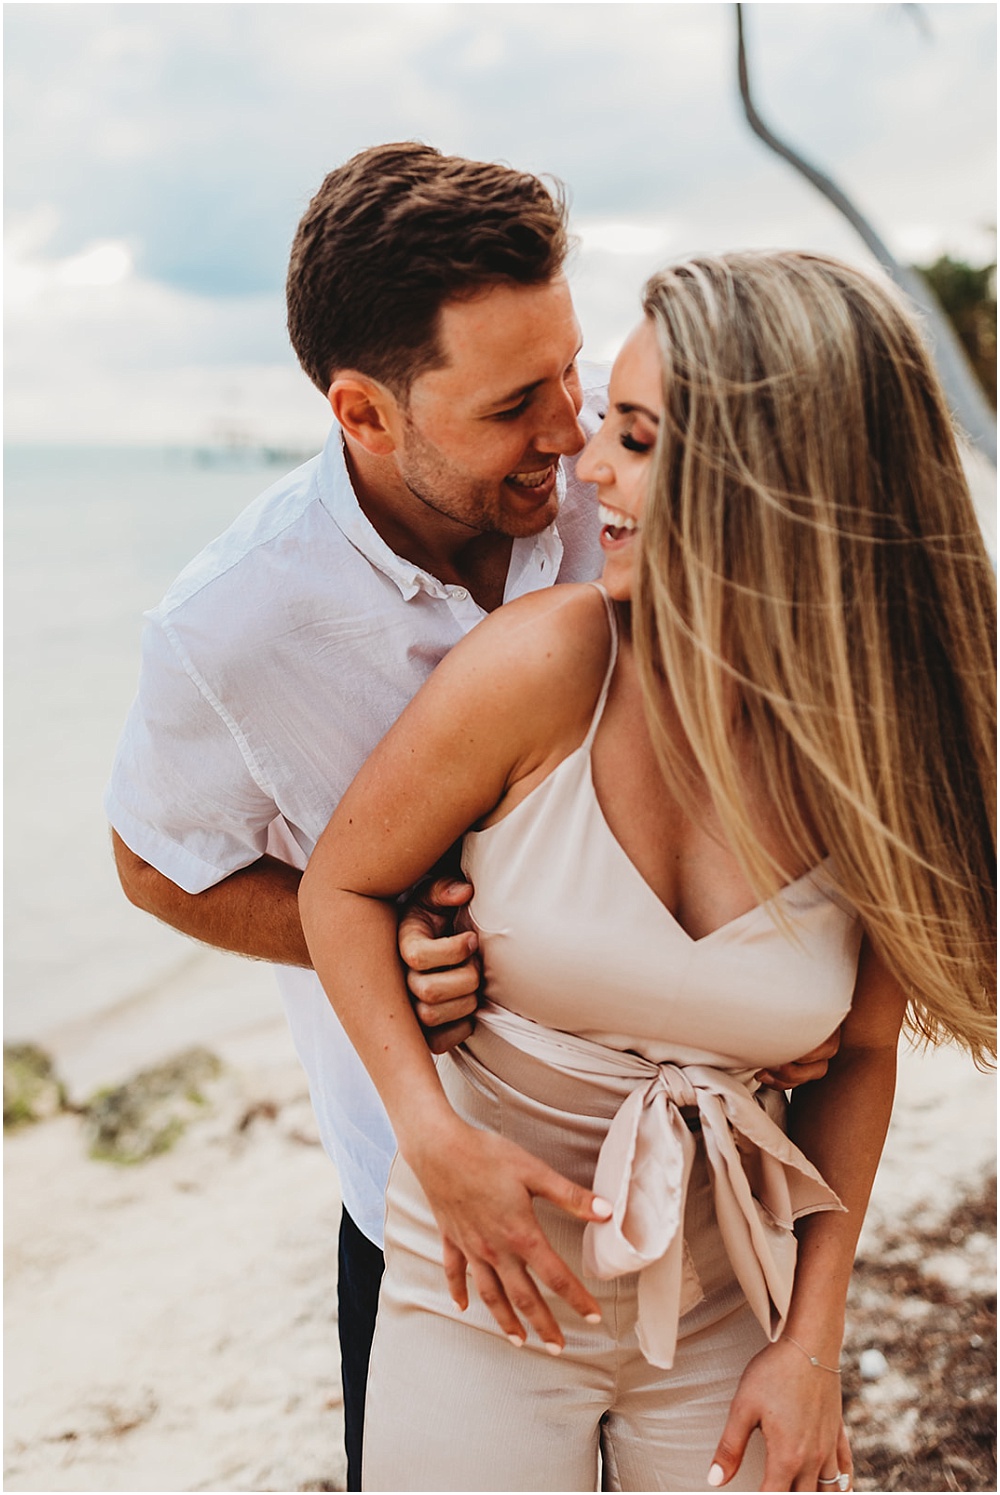 Engagement portraits of couple on beach